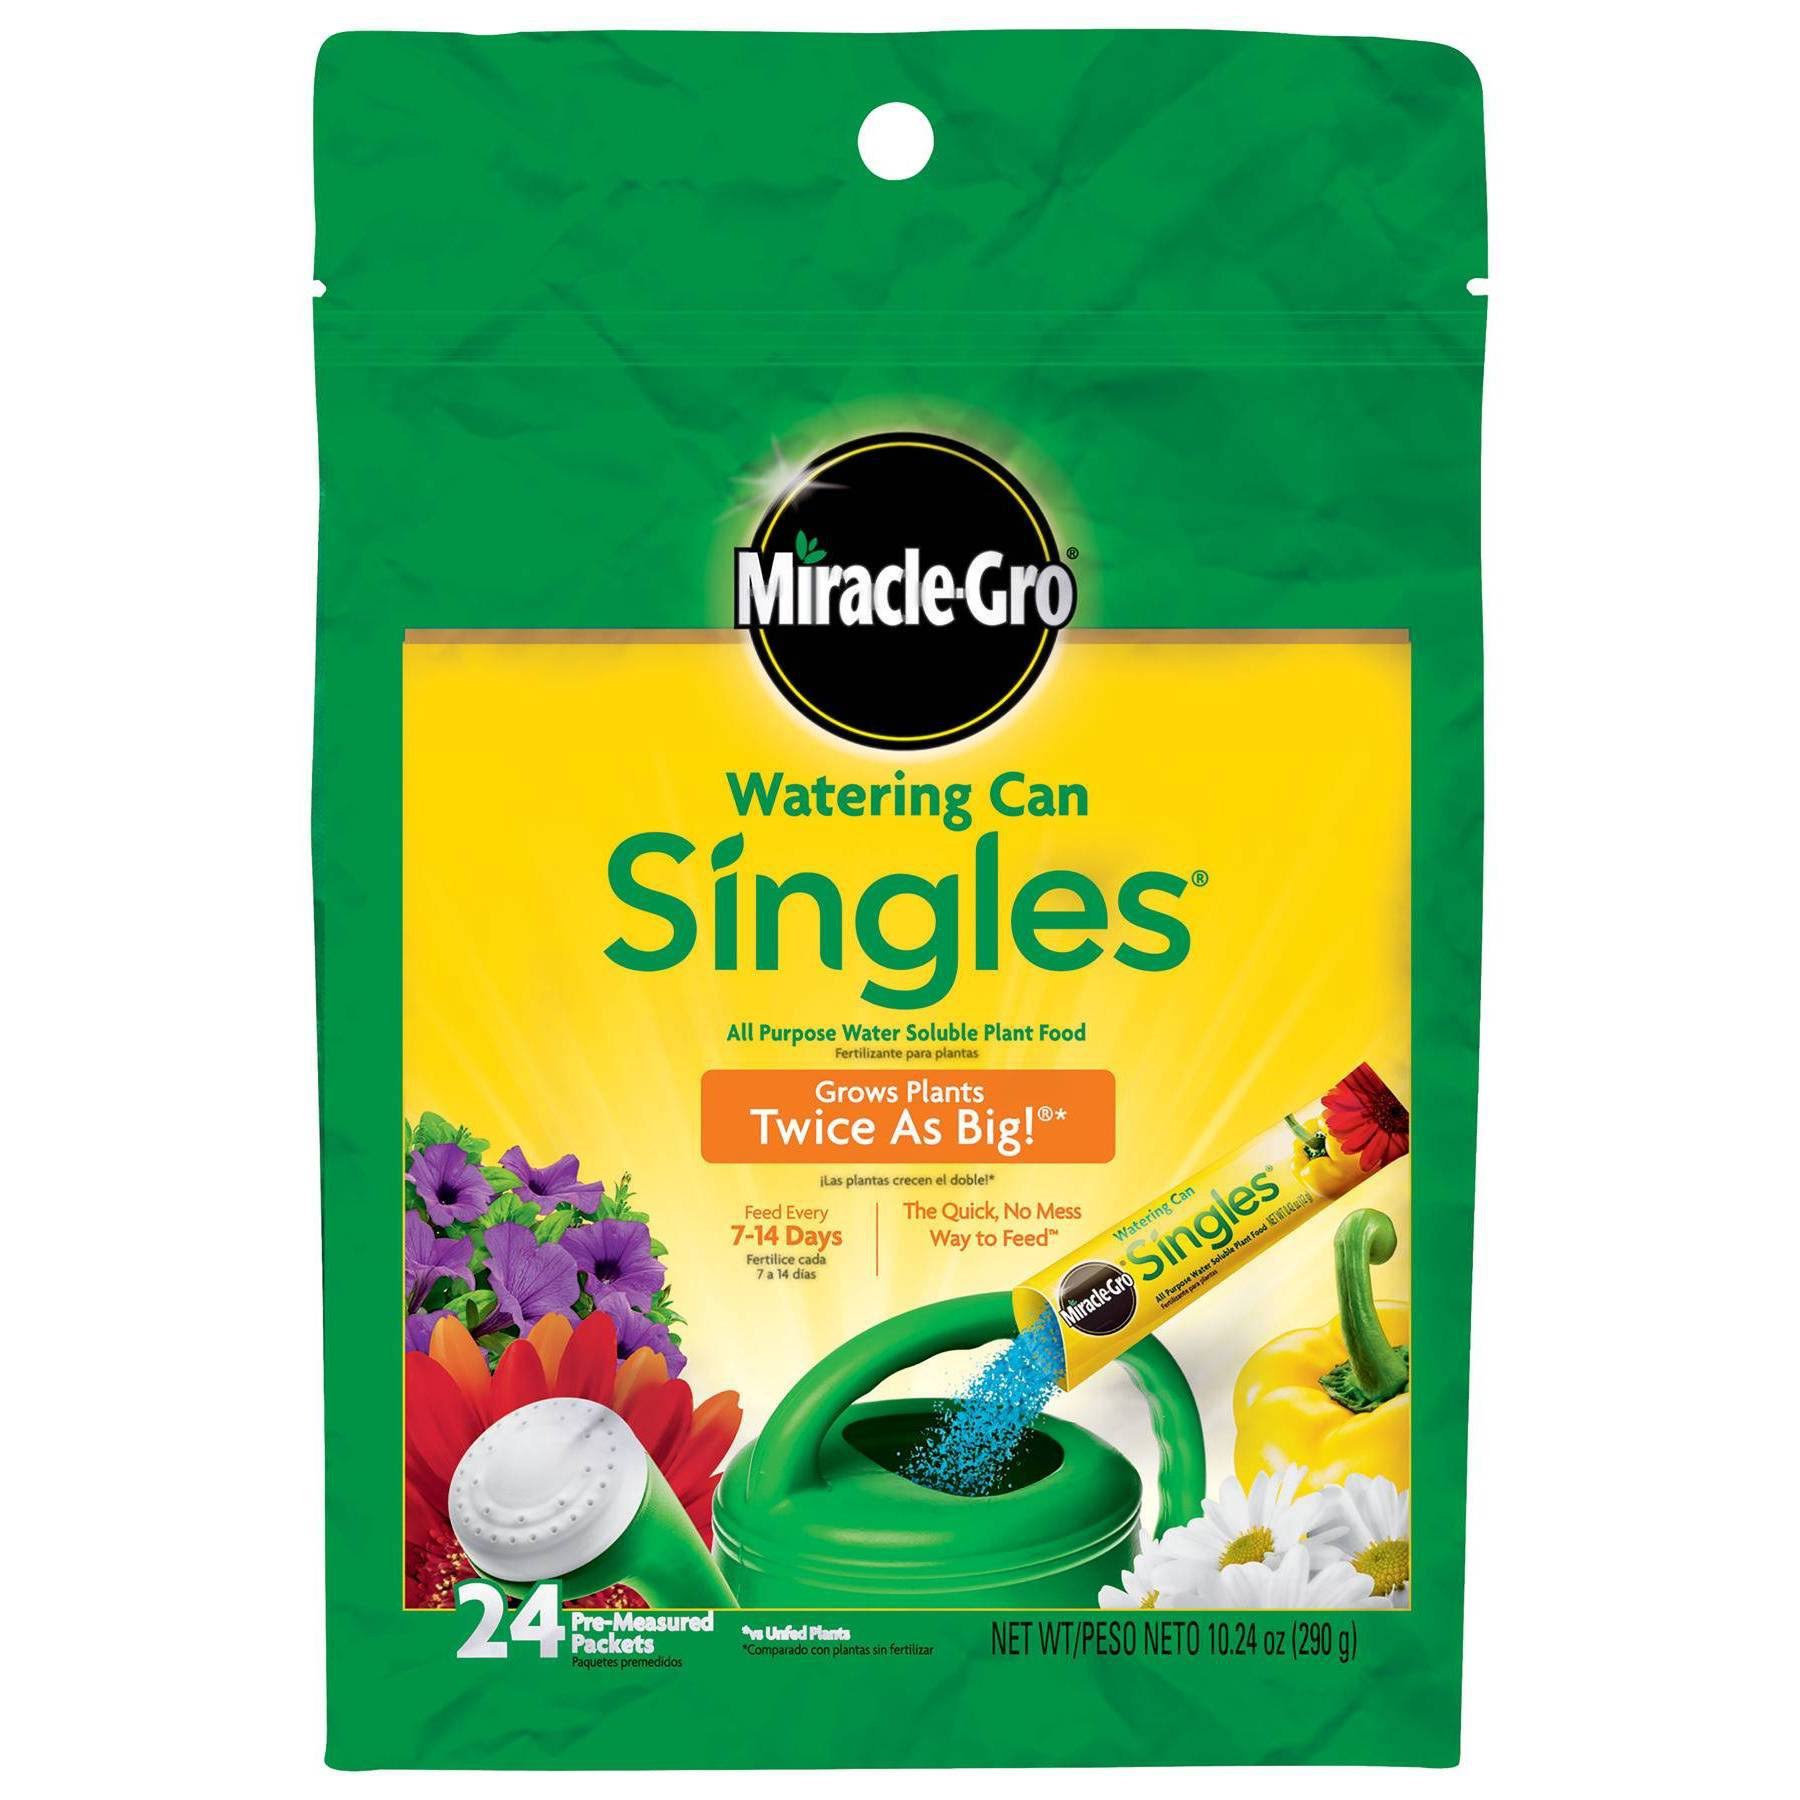 Miracle-Gro Watering Can Singles All Purpose Plant Food - Water-Soluble, 24 Pack